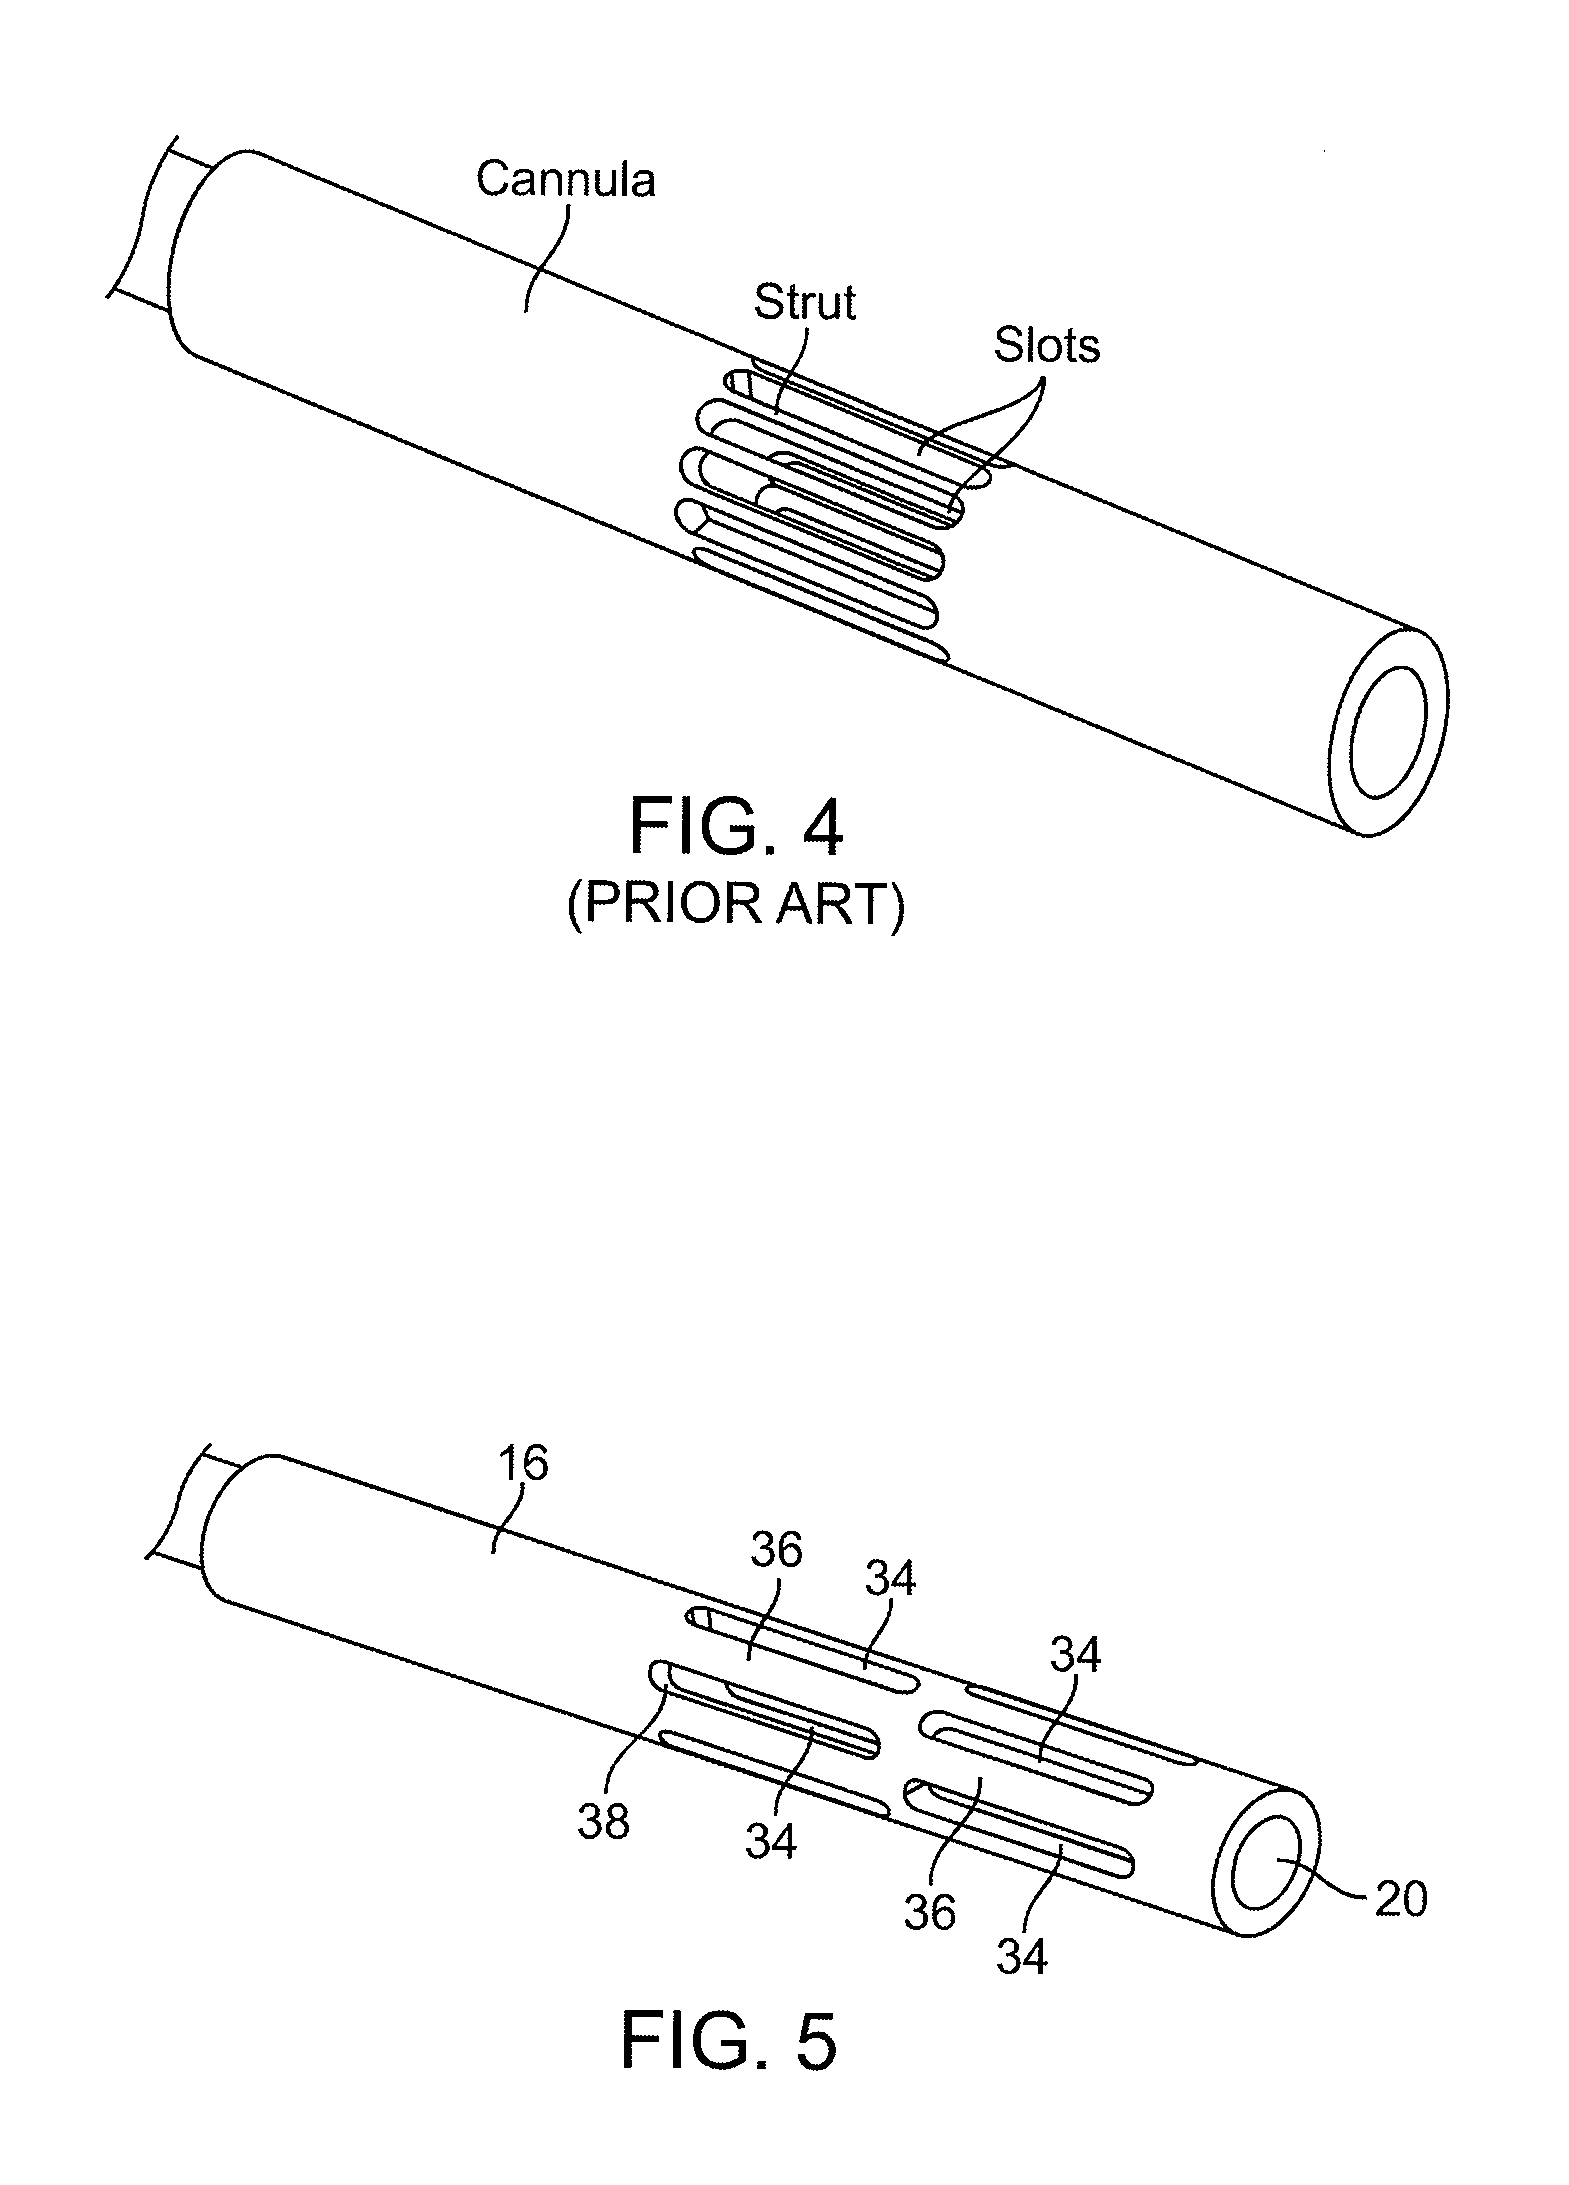 Radiofrequency ablation device